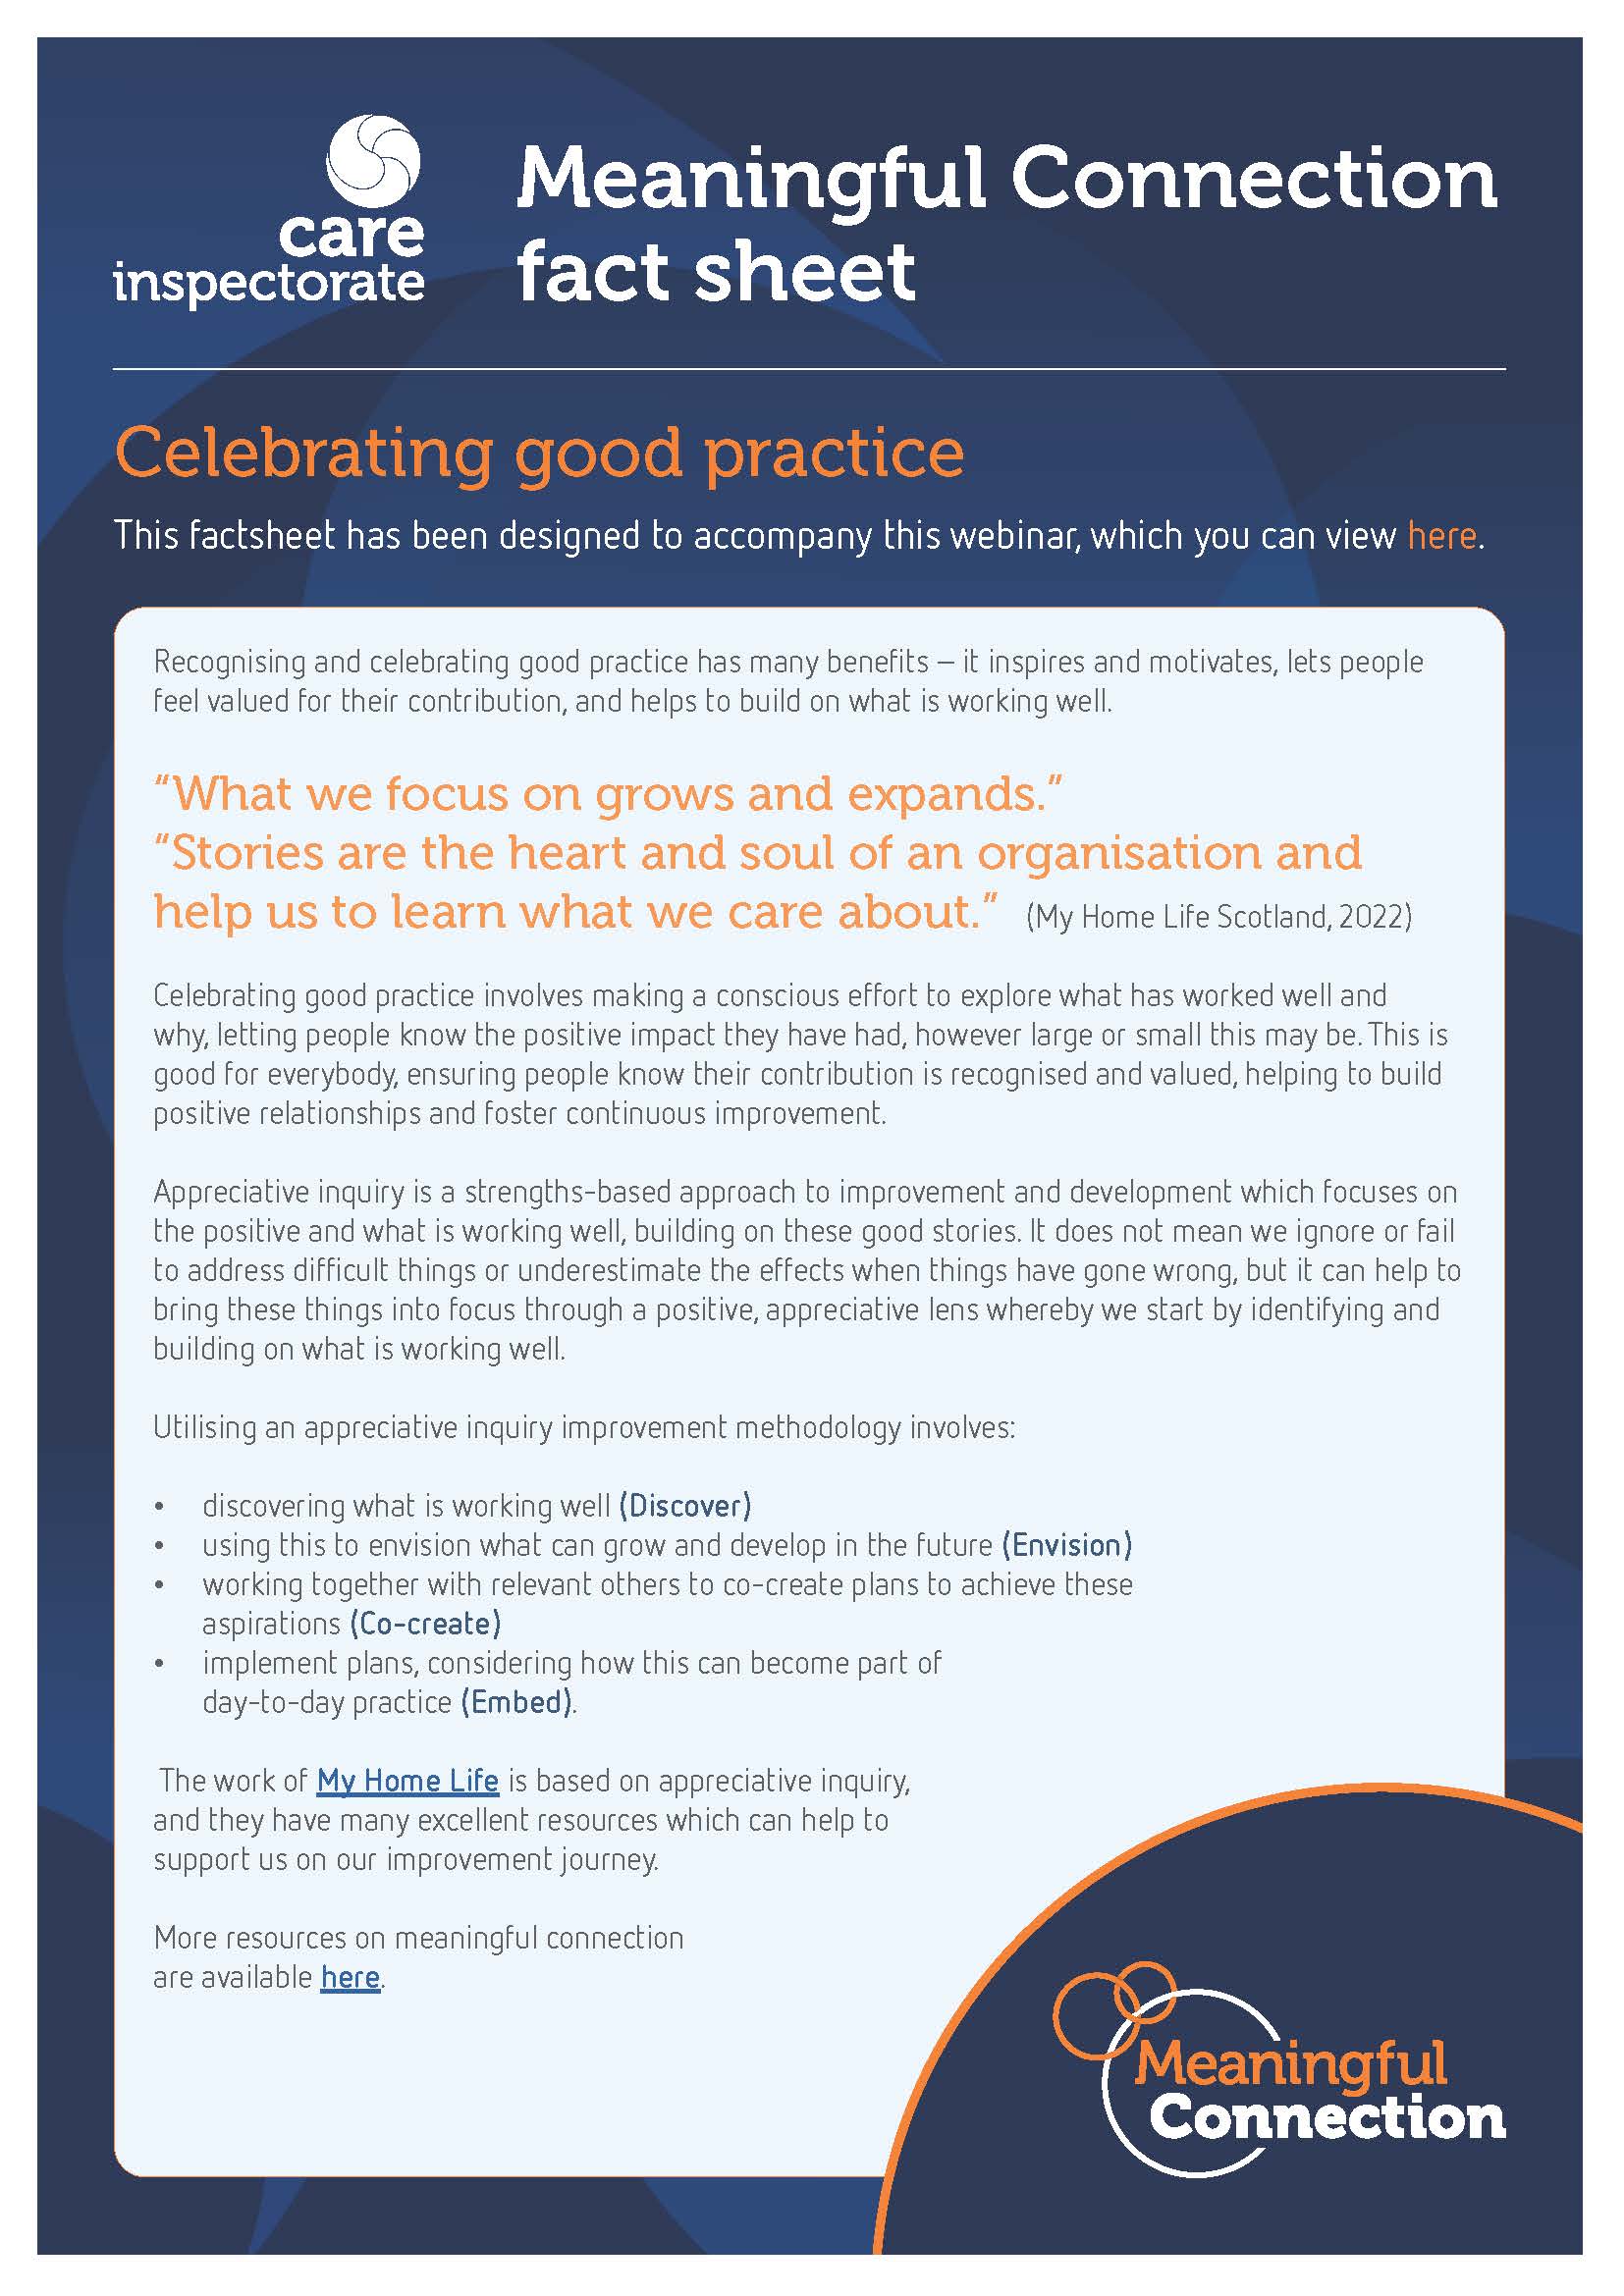 Meaningful connection fact sheet Celebrating good practice